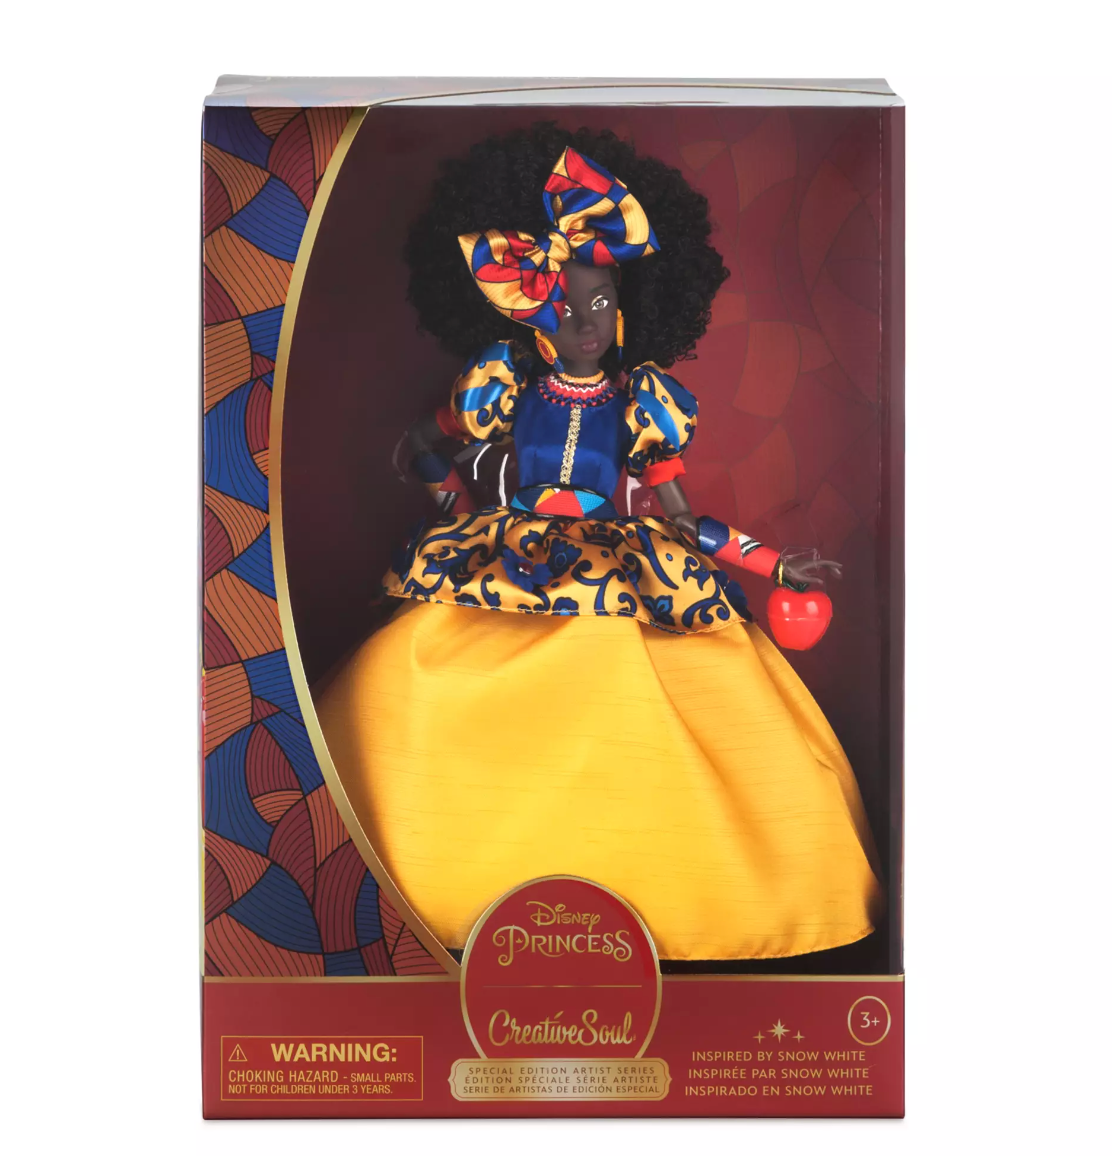 Disney Princess Doll by CreativeSoul Photography Inspired by Snow White New Box